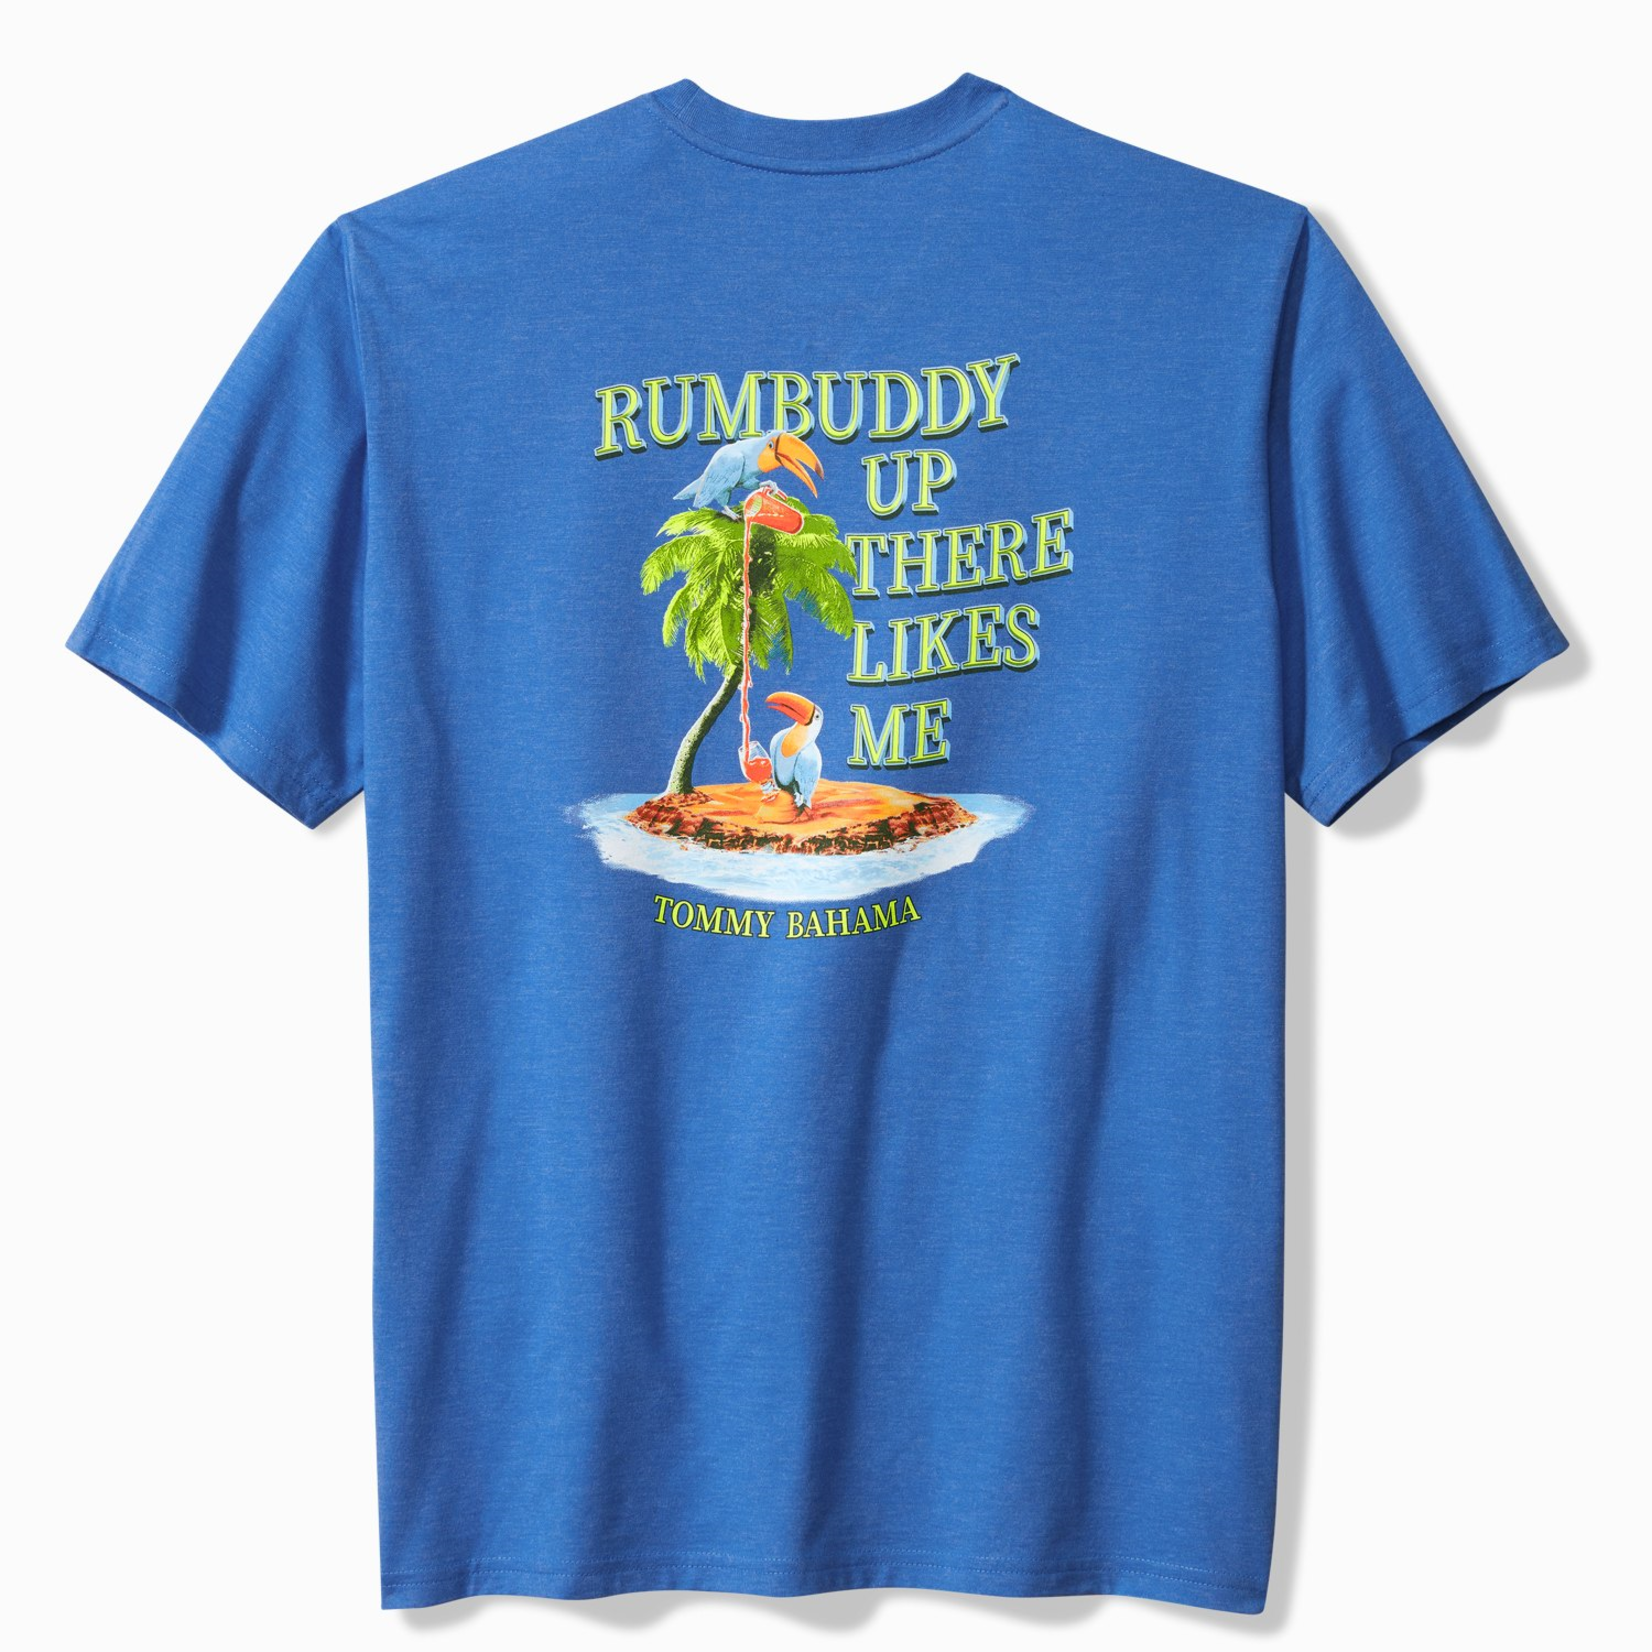 Tommy Bahama Rumbuddy Up There Likes Me Graphic T-Shirt